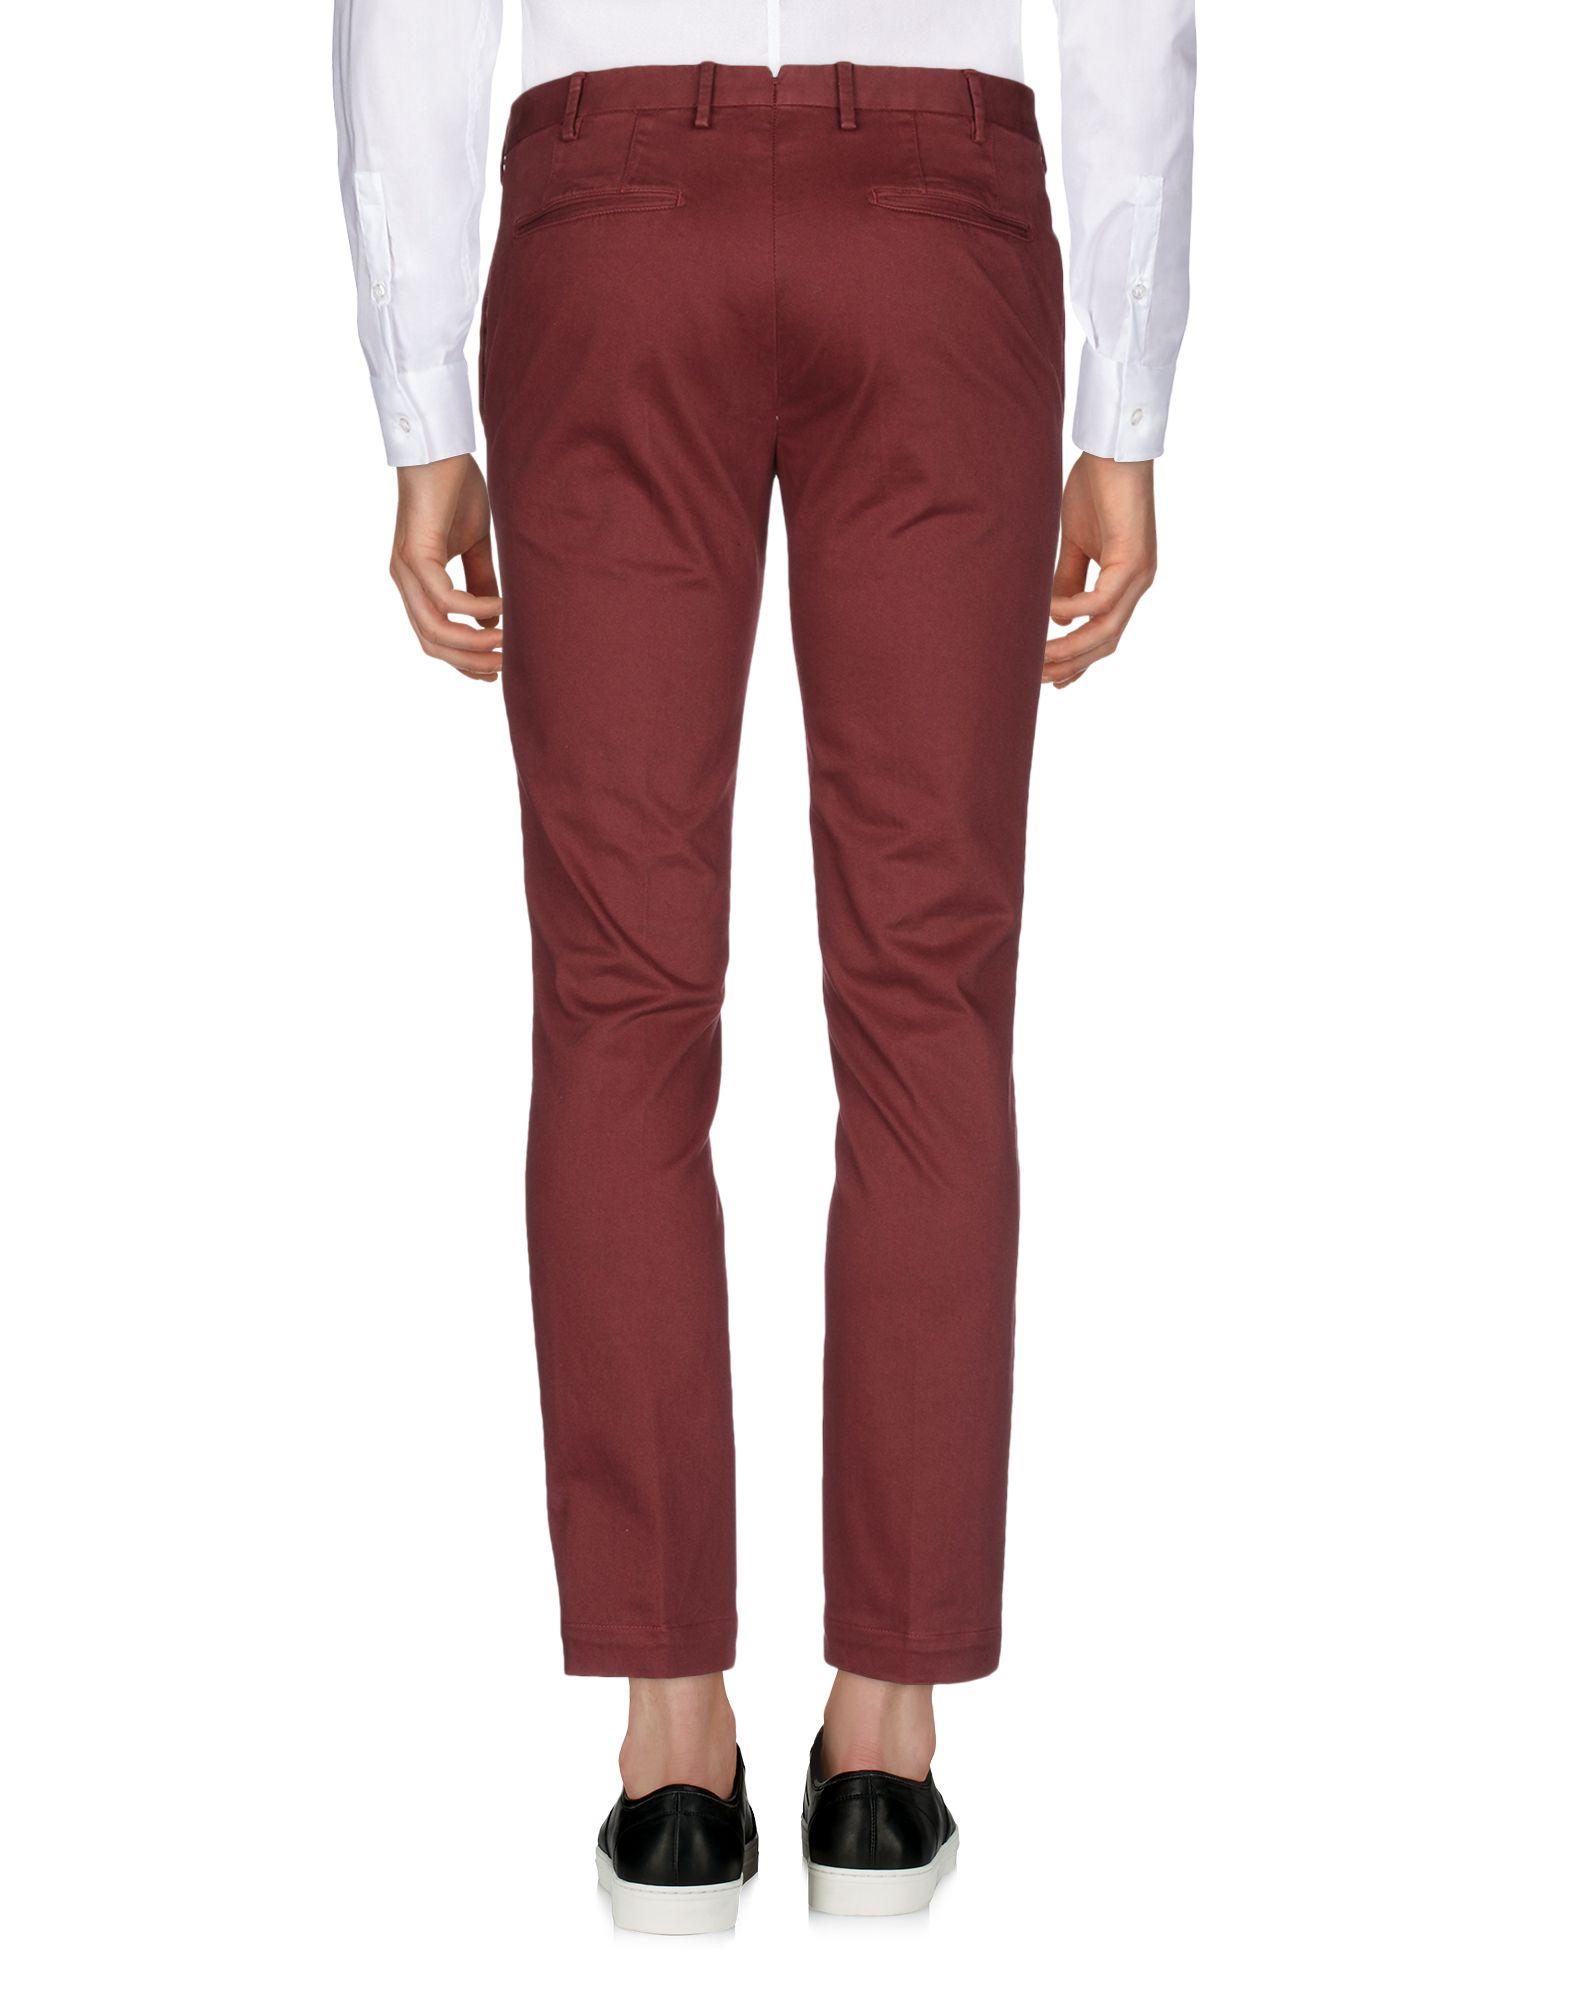 PT01 Cotton Casual Pants in Brick Red (Red) for Men - Lyst